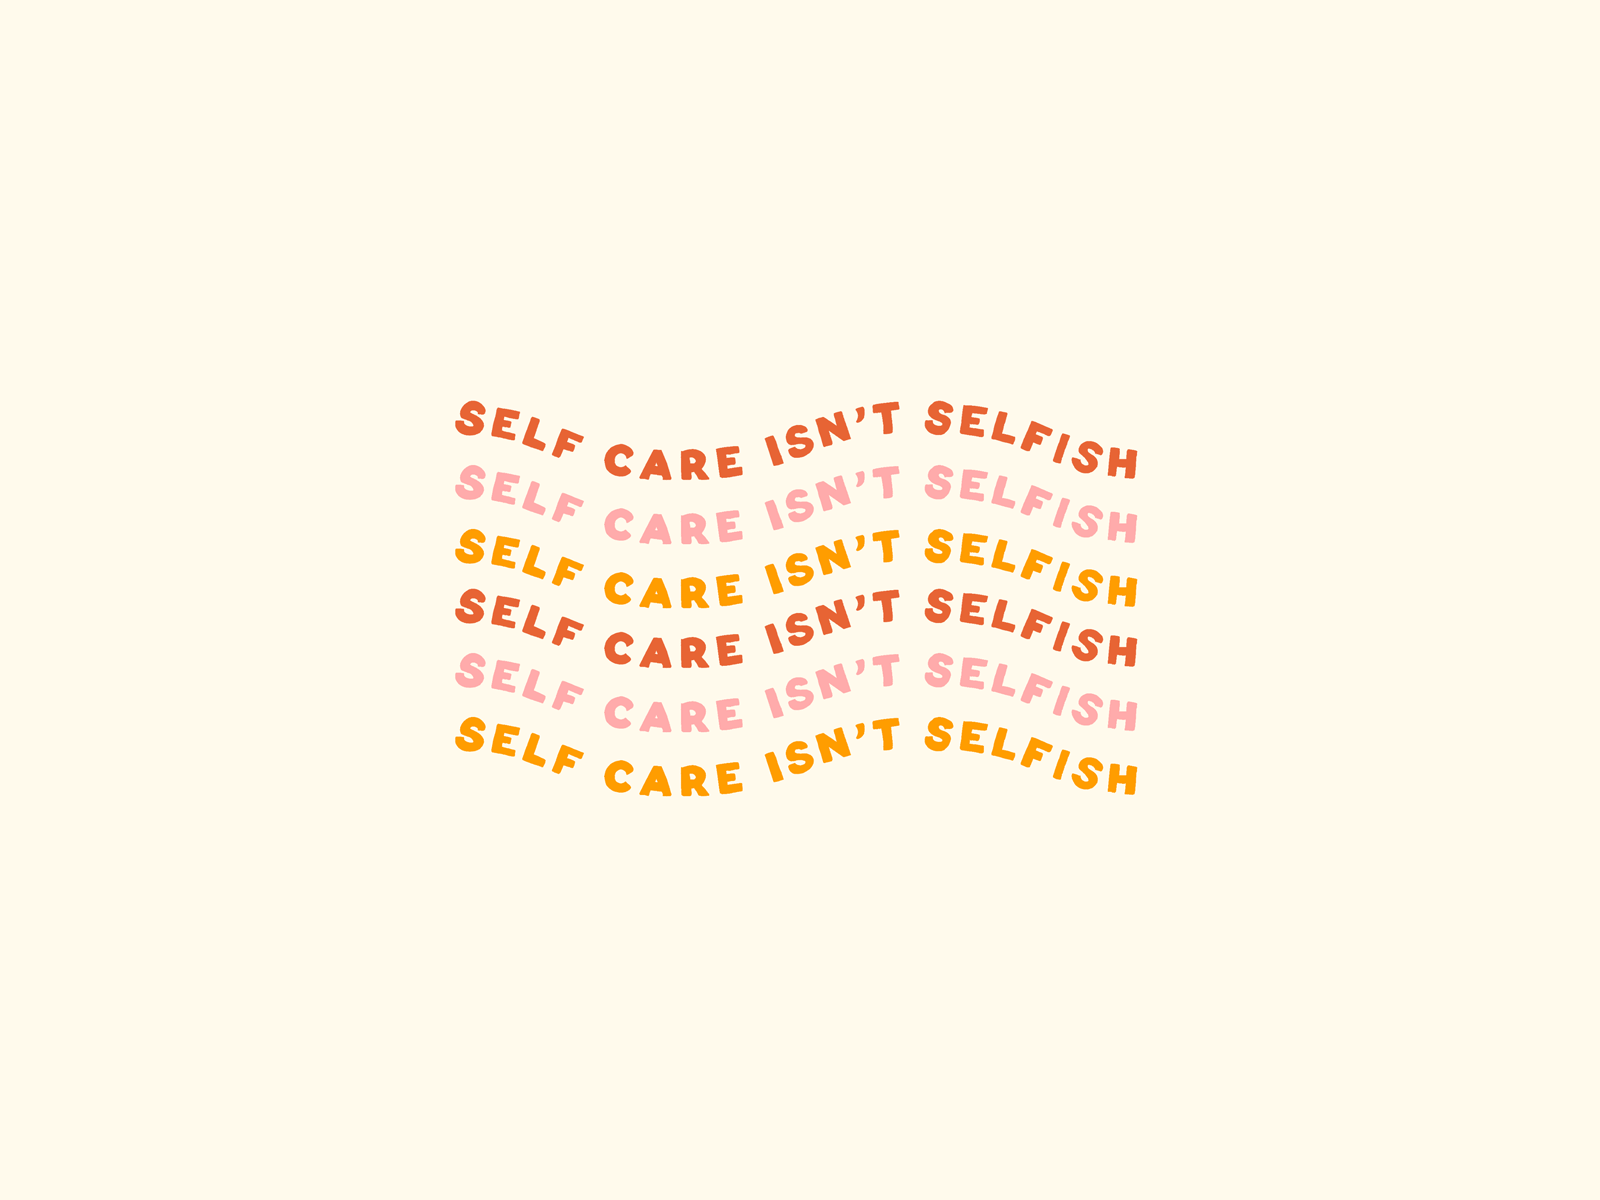 clever sam recommends self care gif pic